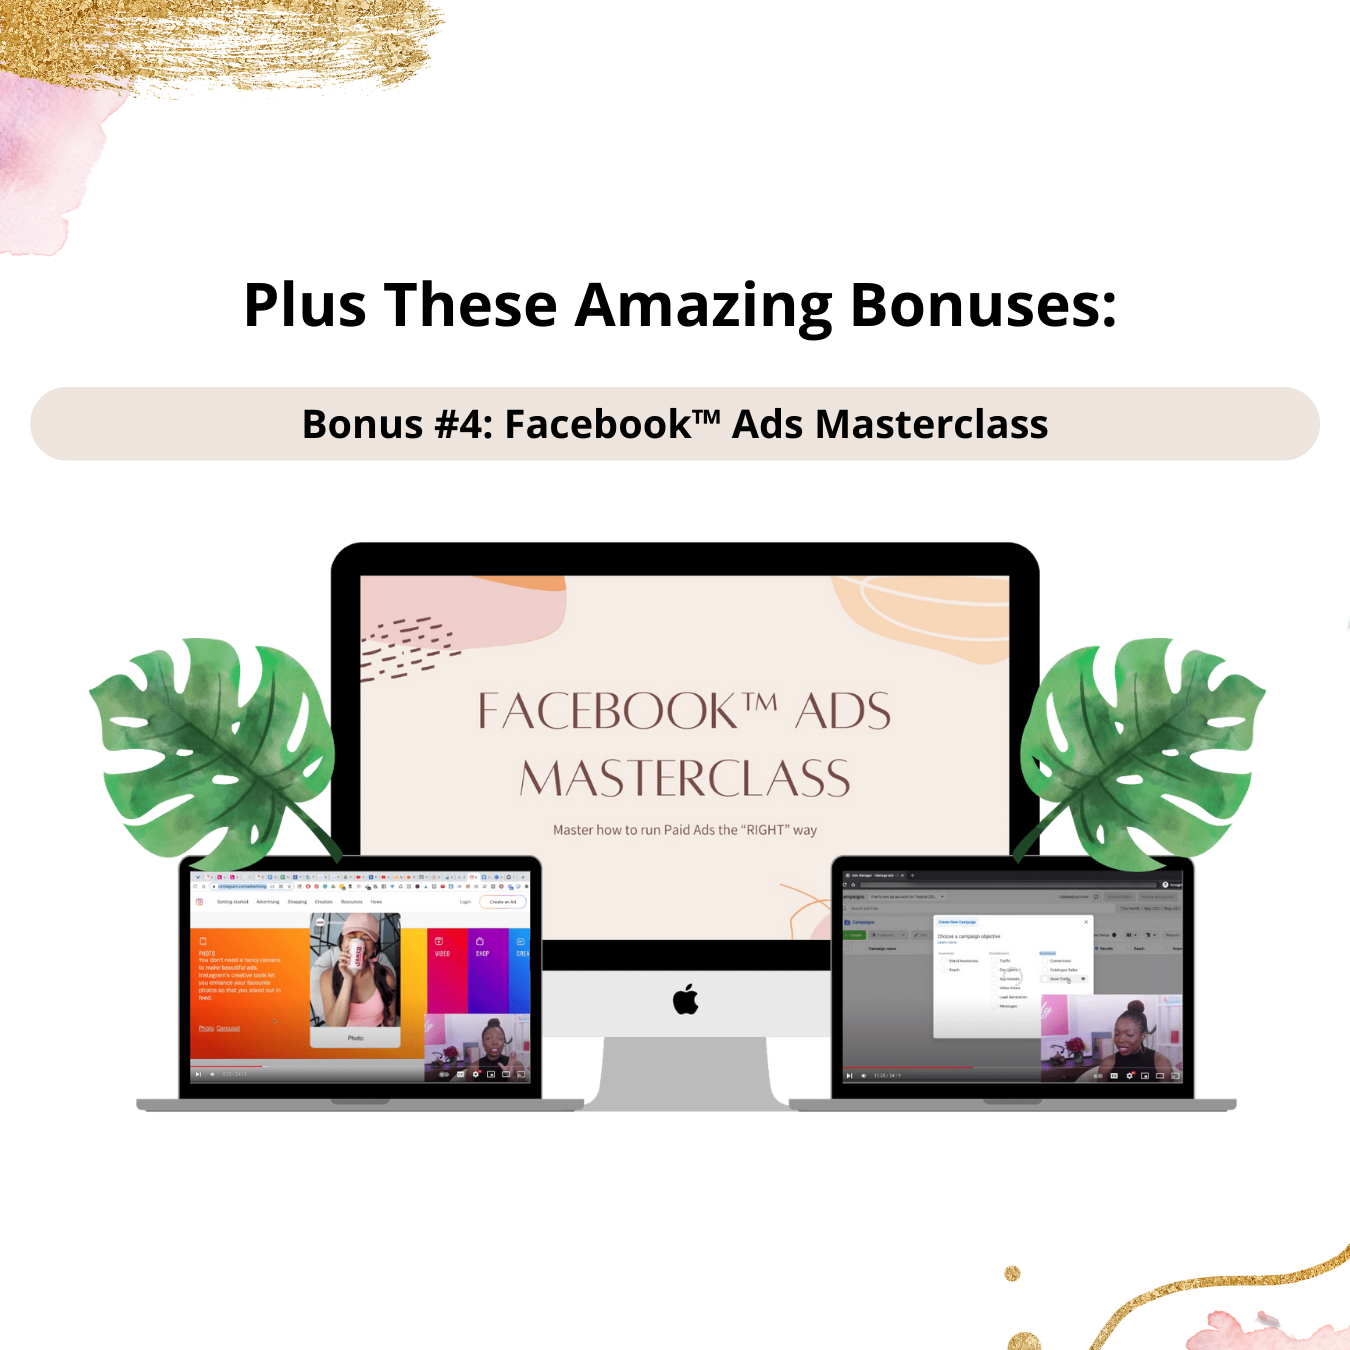 Facebook Marketing Bundle with Resell Rights